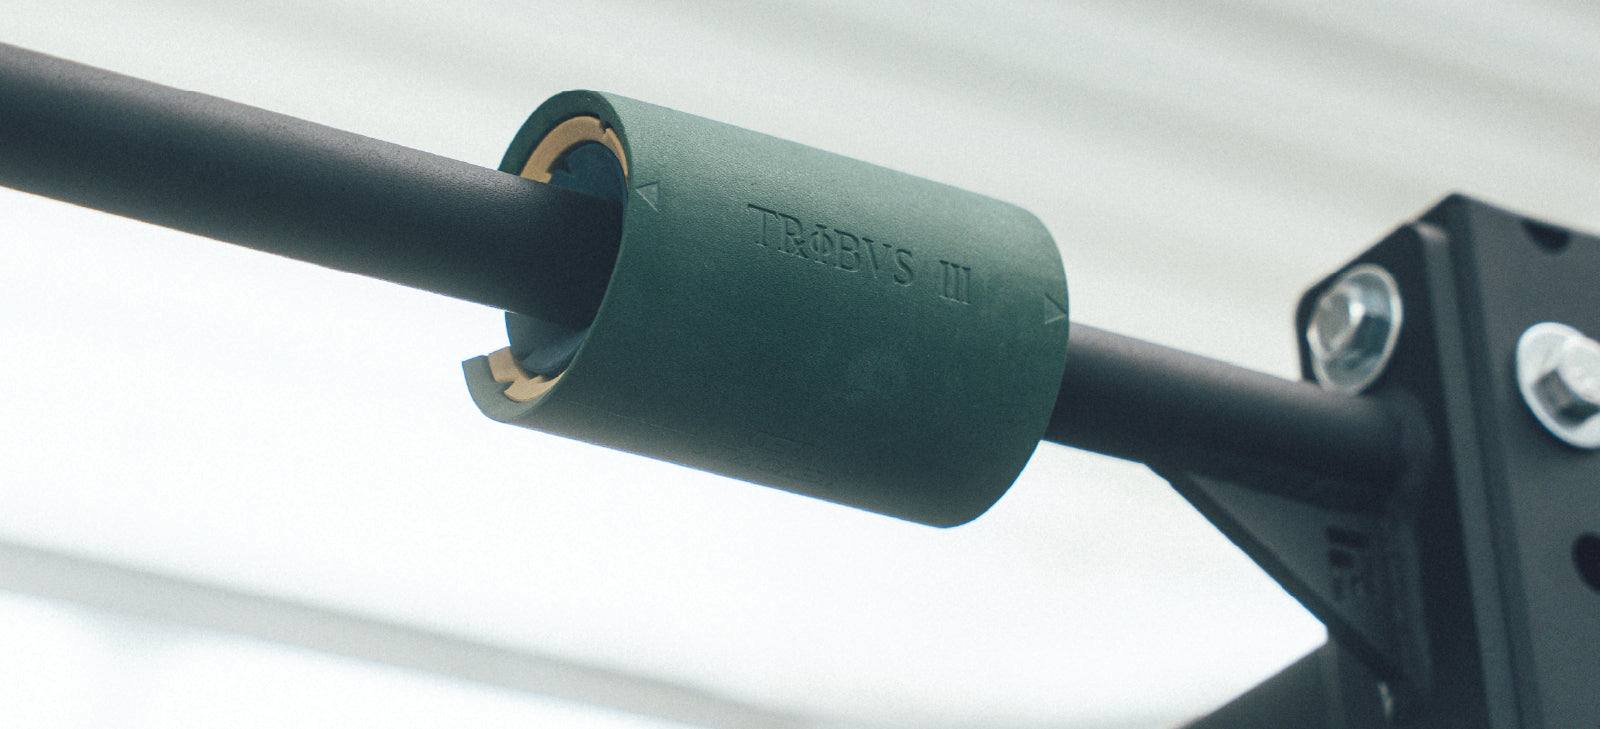 Tribus Thick Grips - The Pair that Cares - New & Improved Design mounted on a pull-up bars to showcase the design. Overexposed.